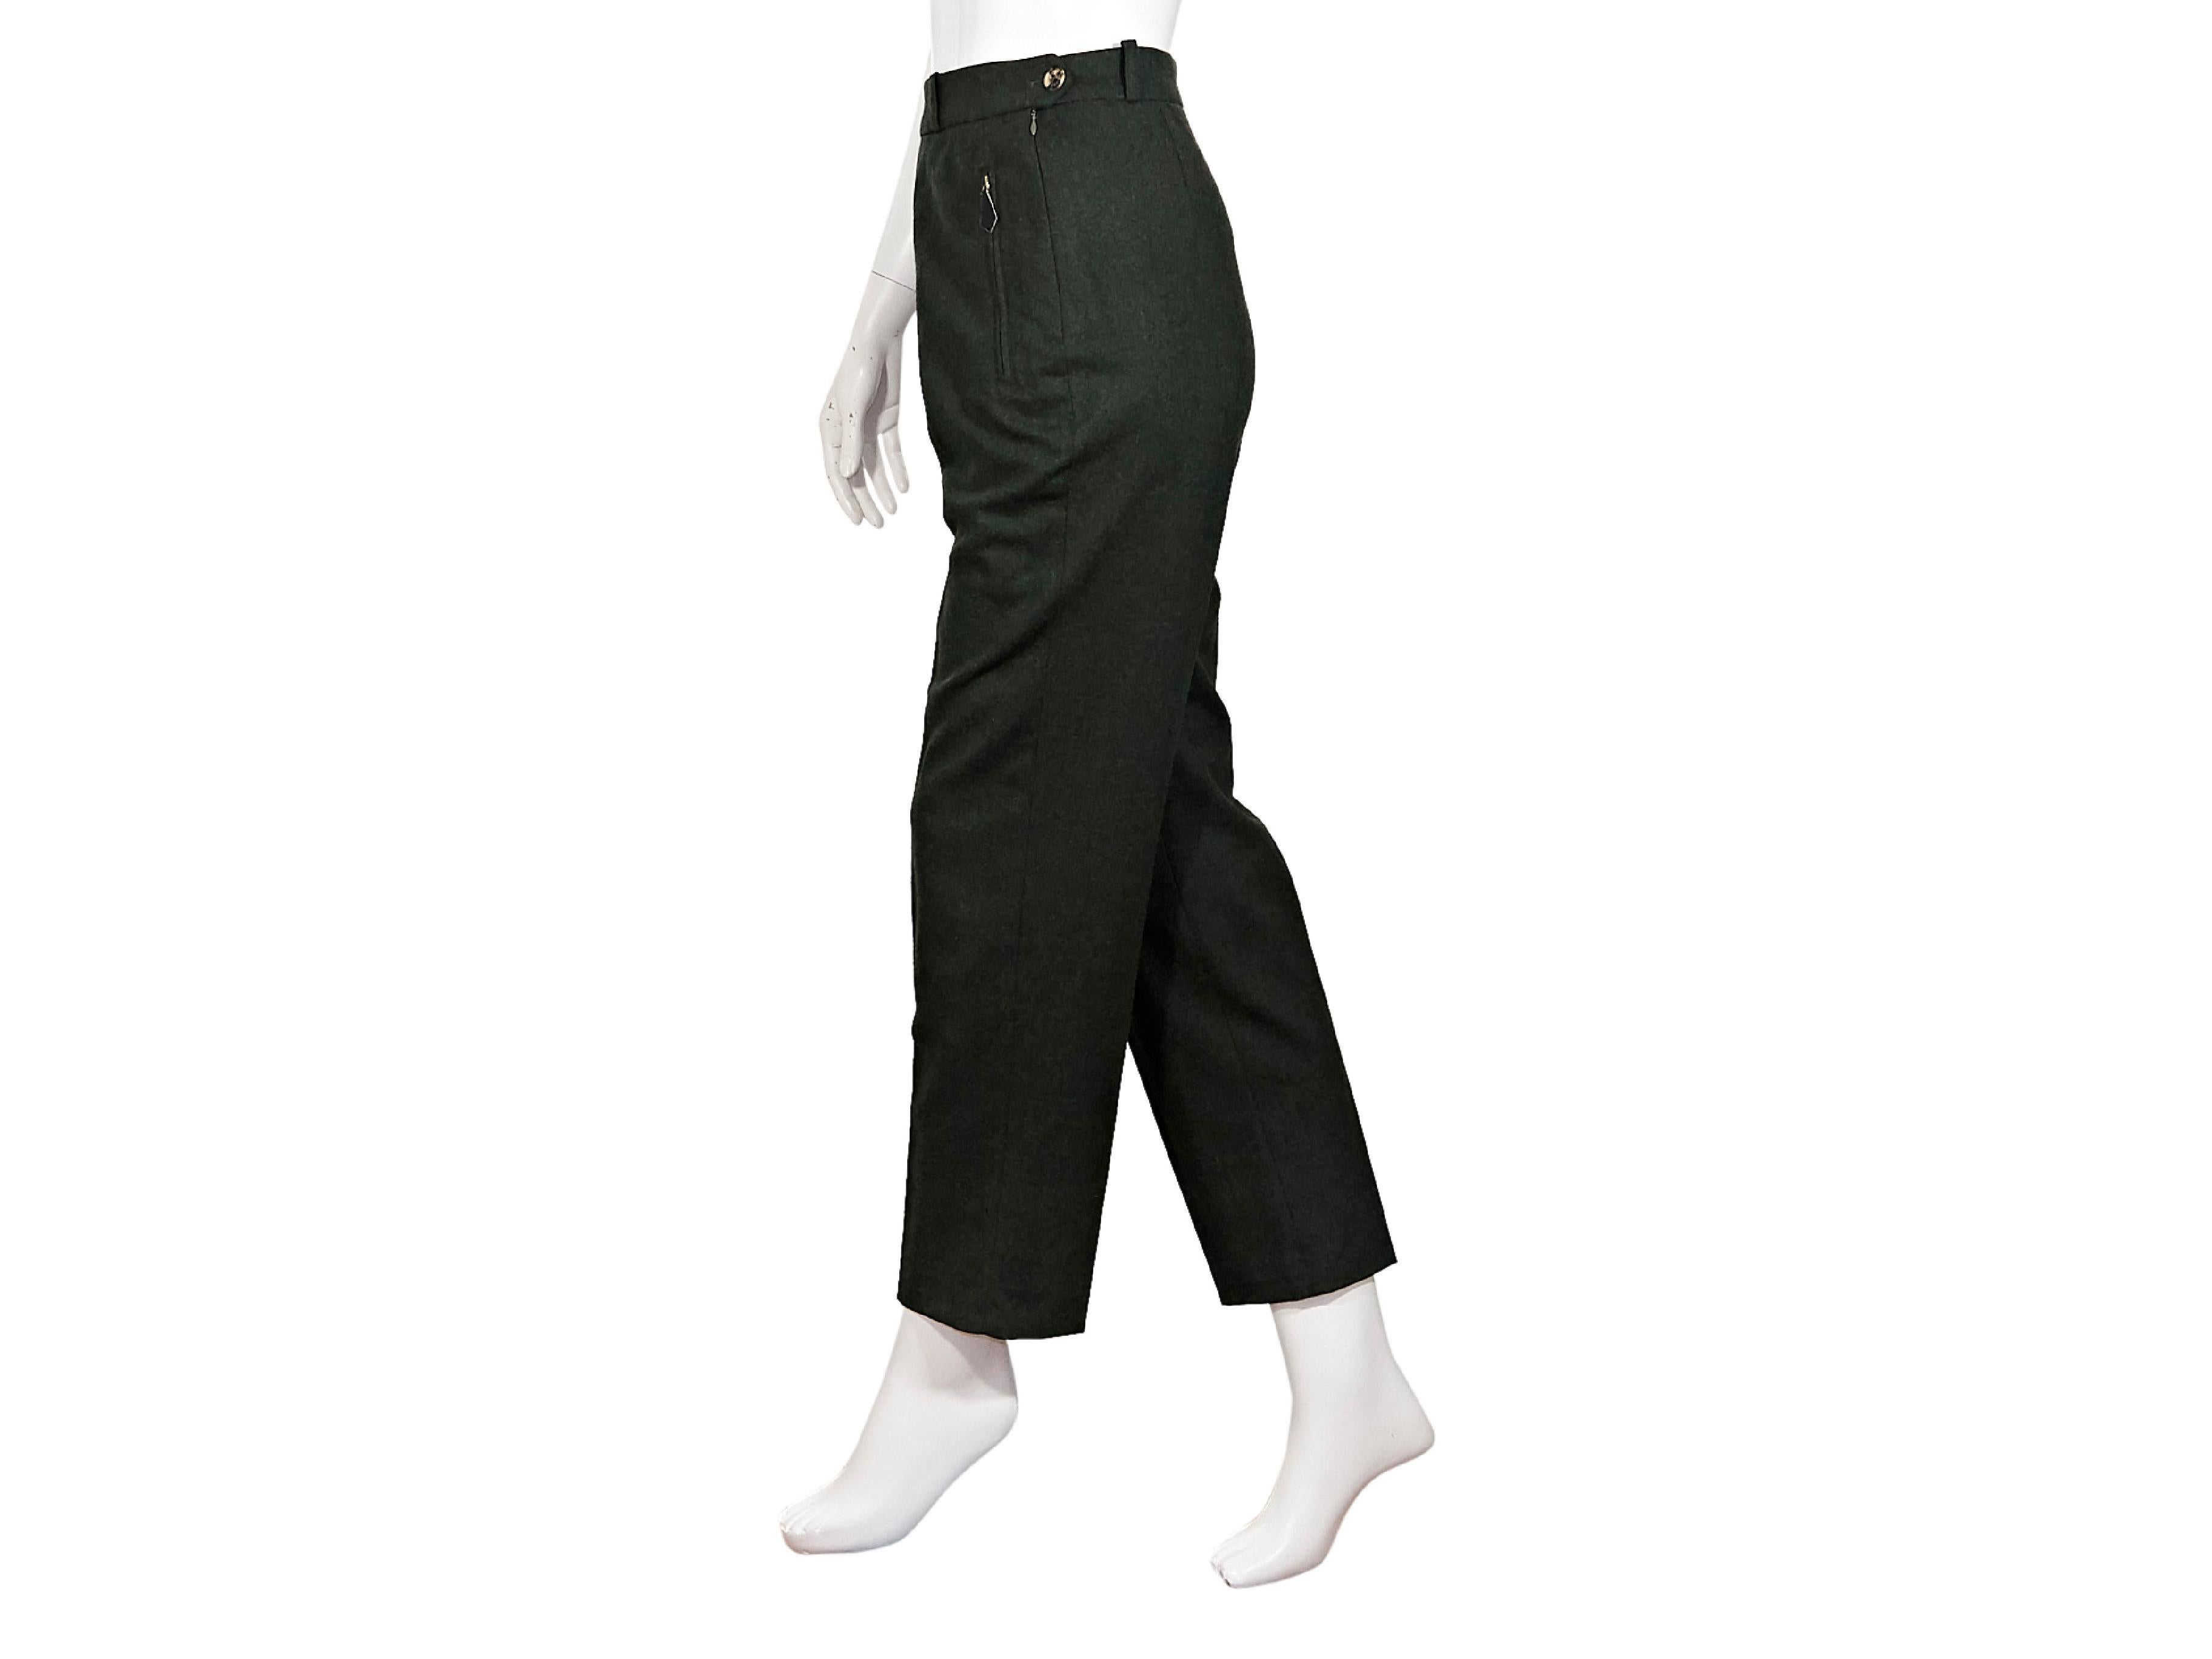 Product details:  Vintage green wool pants by Hermes.  Banded waist with belt loops.  Waist zip pockets. Side button with concealed side zip closure.  Label size FR 36.  28